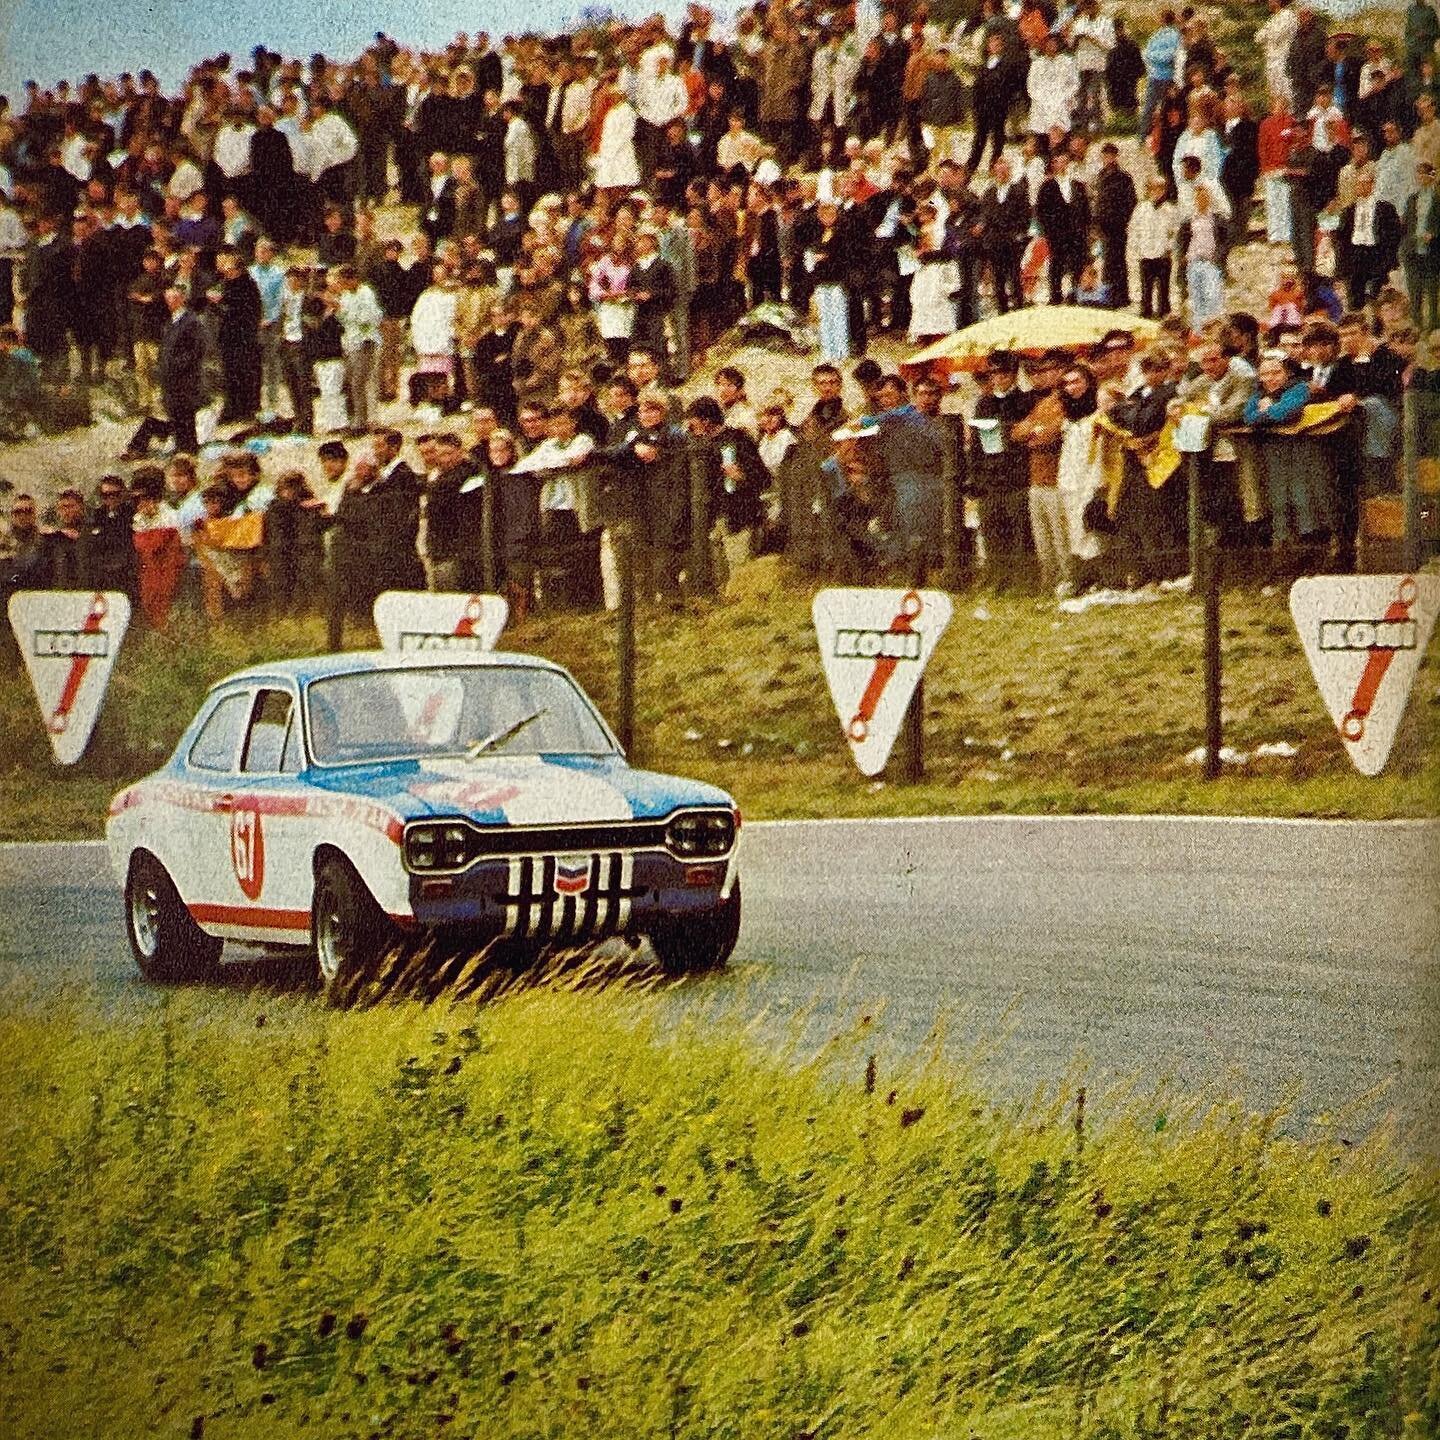 Gustaaf &quot;Taf&quot; Witvrouw with the Ford Chevron Team Escort TC at the 1969 Zandvoort Trophy ETCC round. He would finish third behind his team mates Alain Dex (P2) and Yvette Fontaine (winner).

📷 Ford Belgium

#fordescort #fordescortmk1 #ford